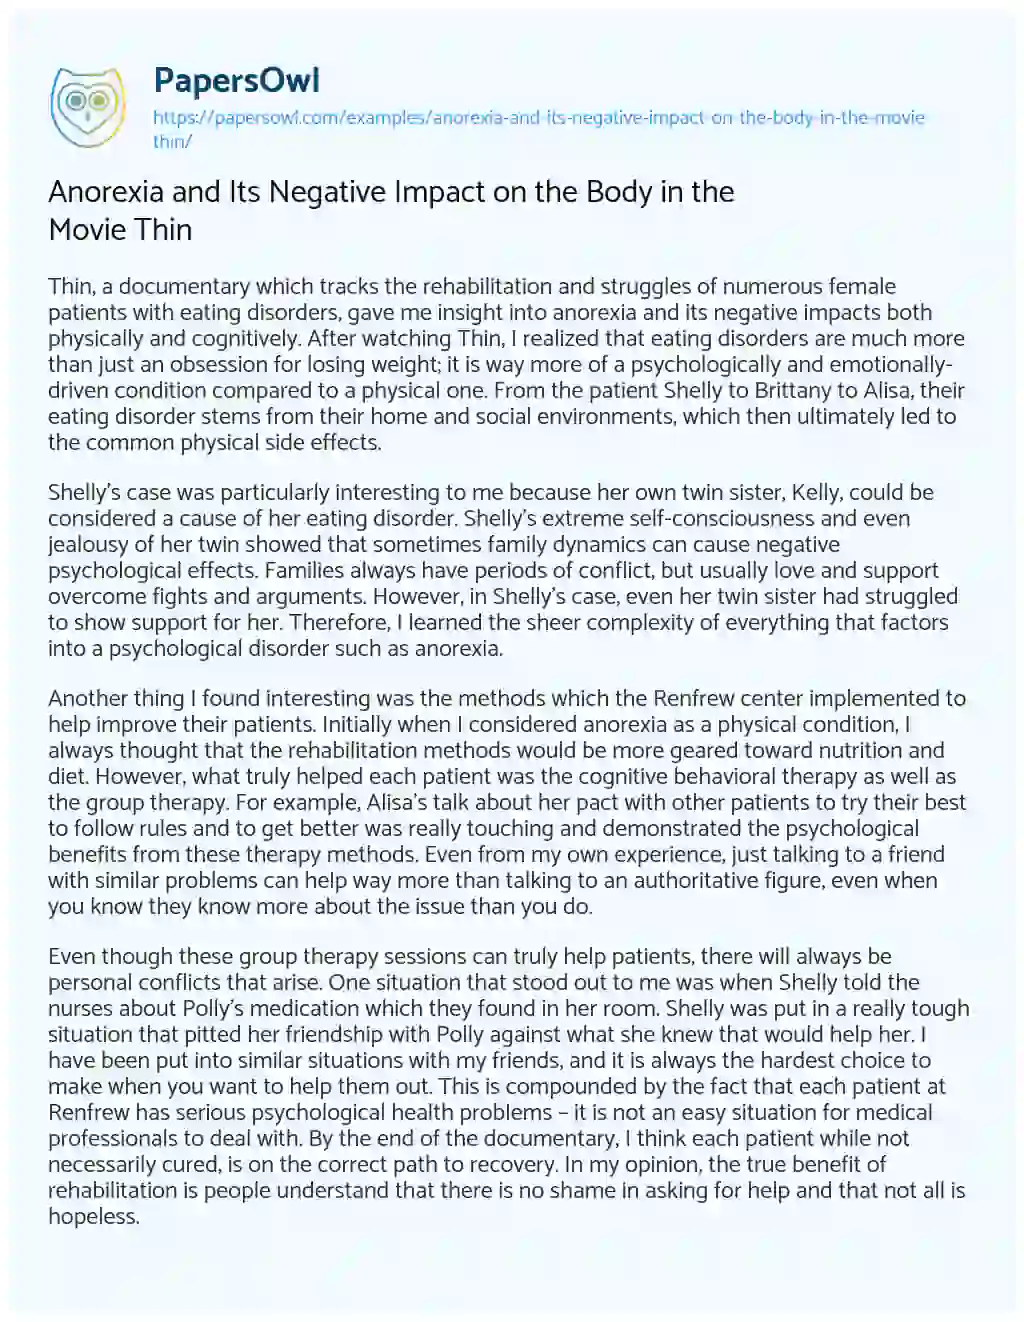 Essay on Anorexia and its Negative Impact on the Body in the Movie Thin